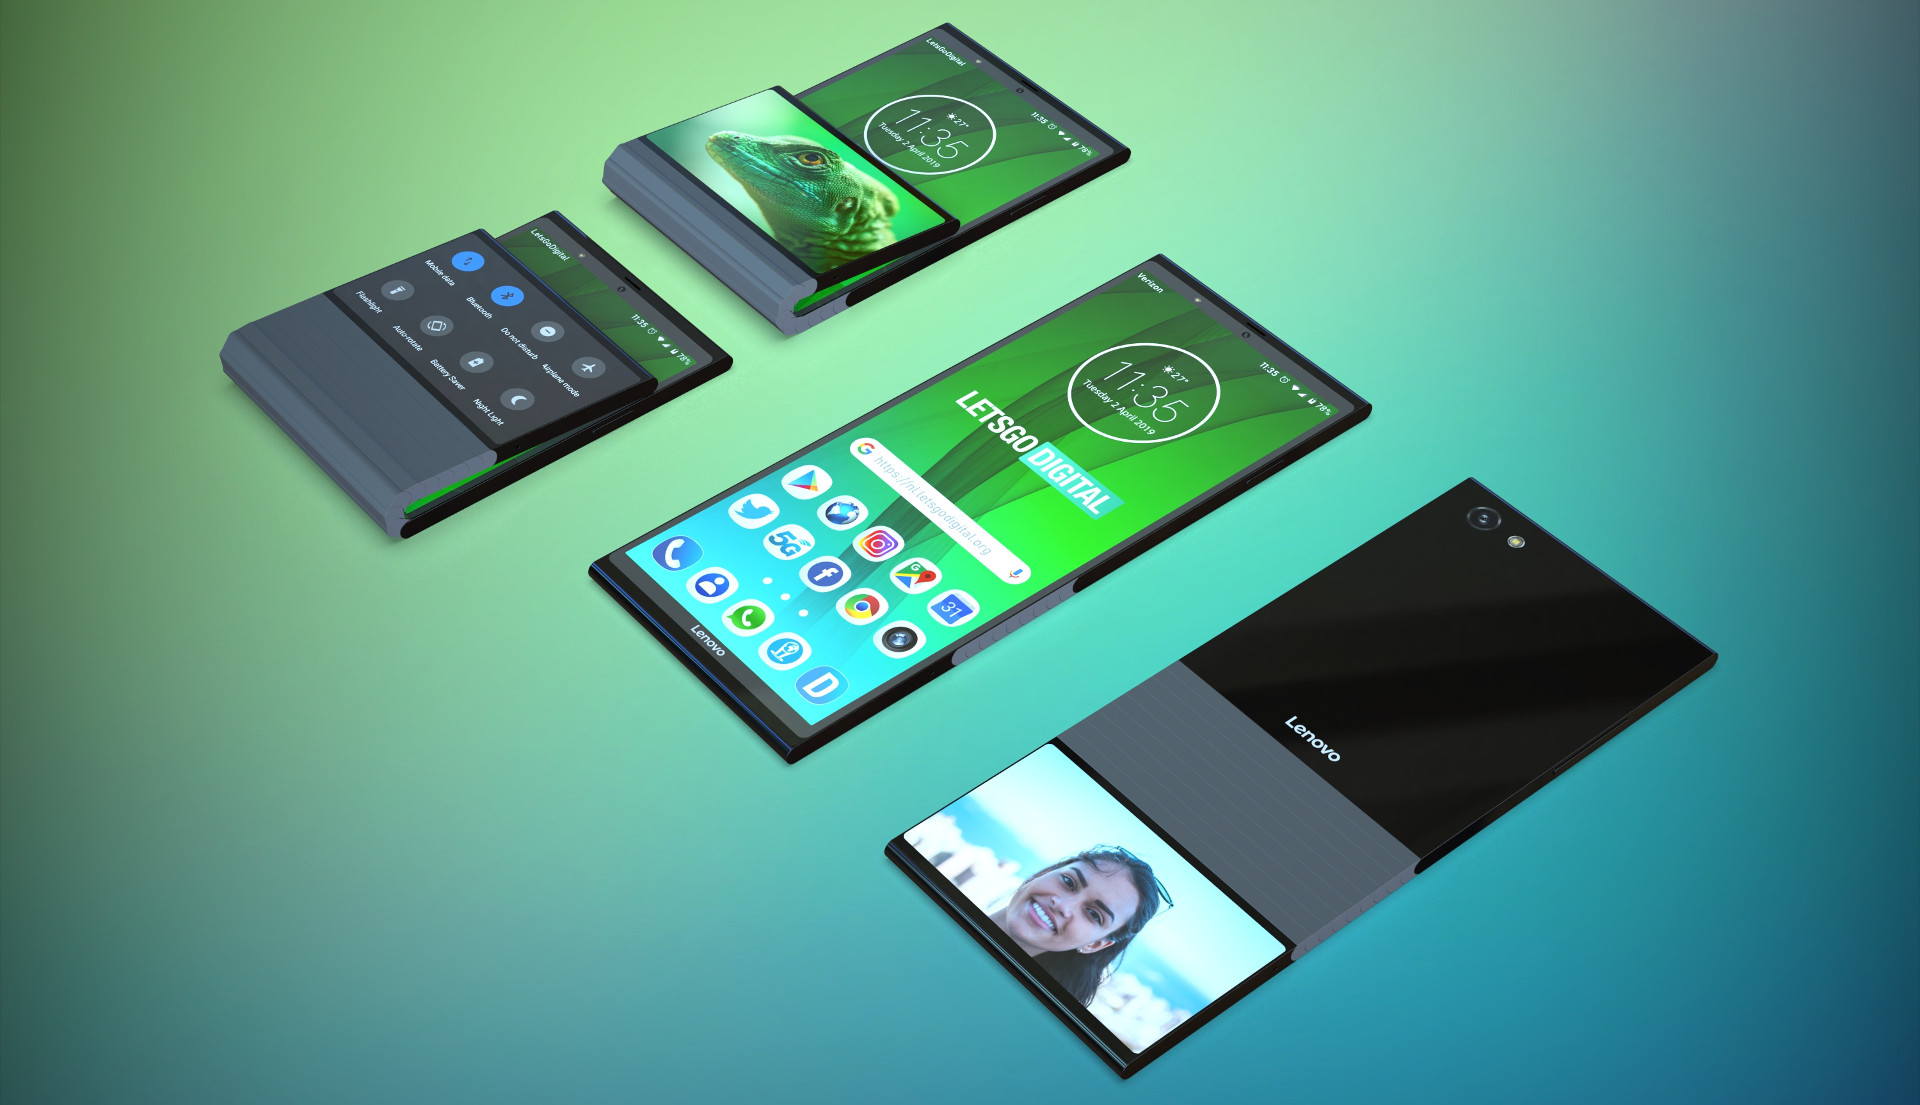 A render based on a Lenovo patent, showing a foldable phone.